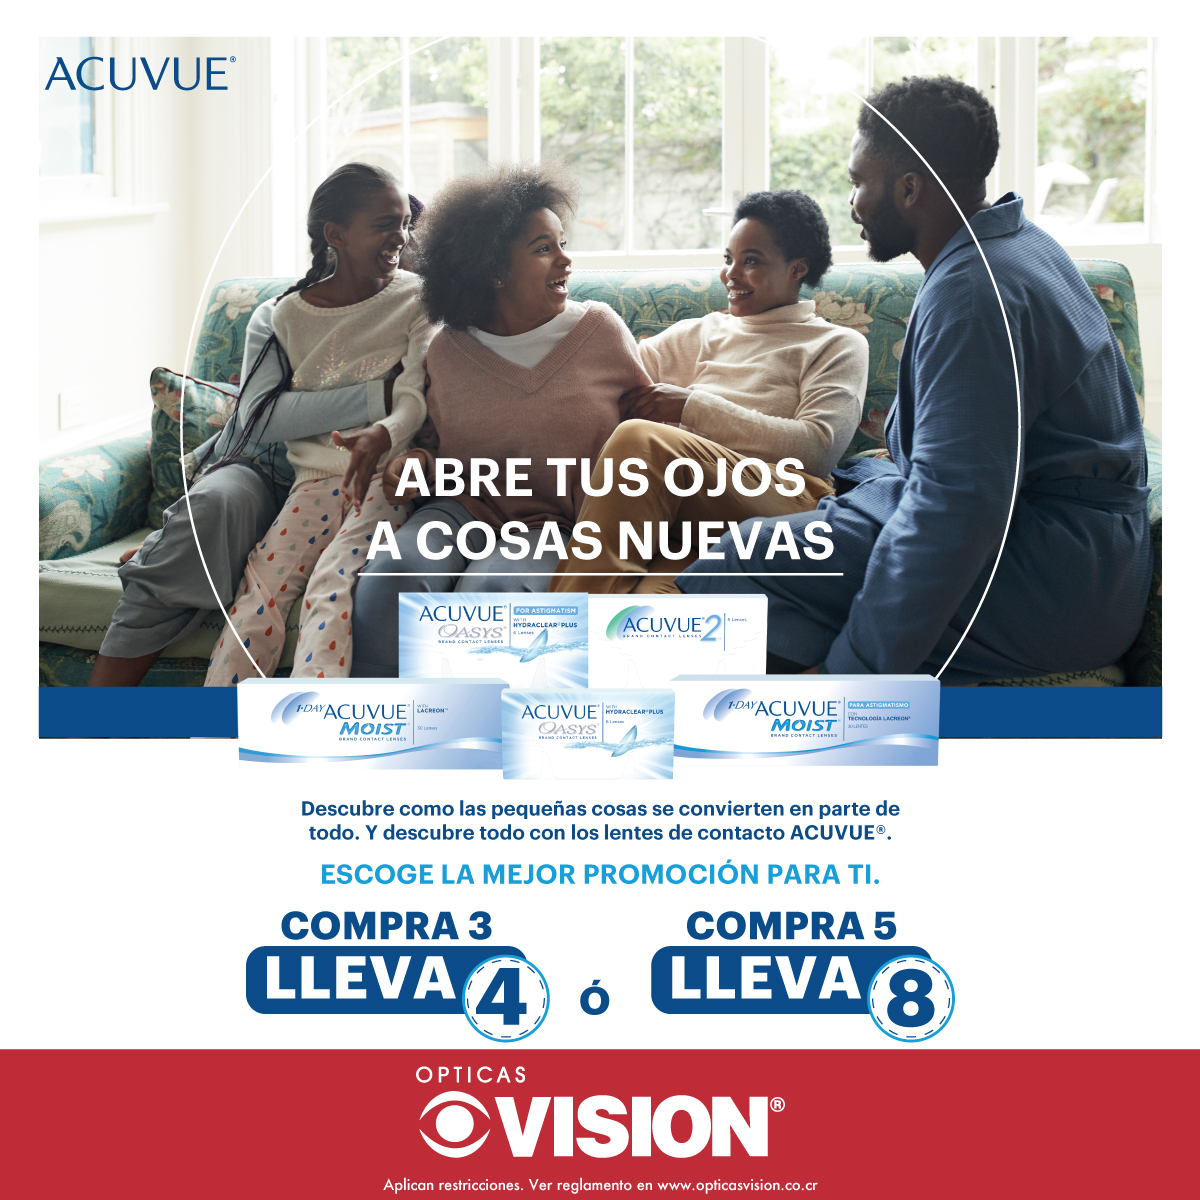 Acuvue - Compre 3 lleve 4